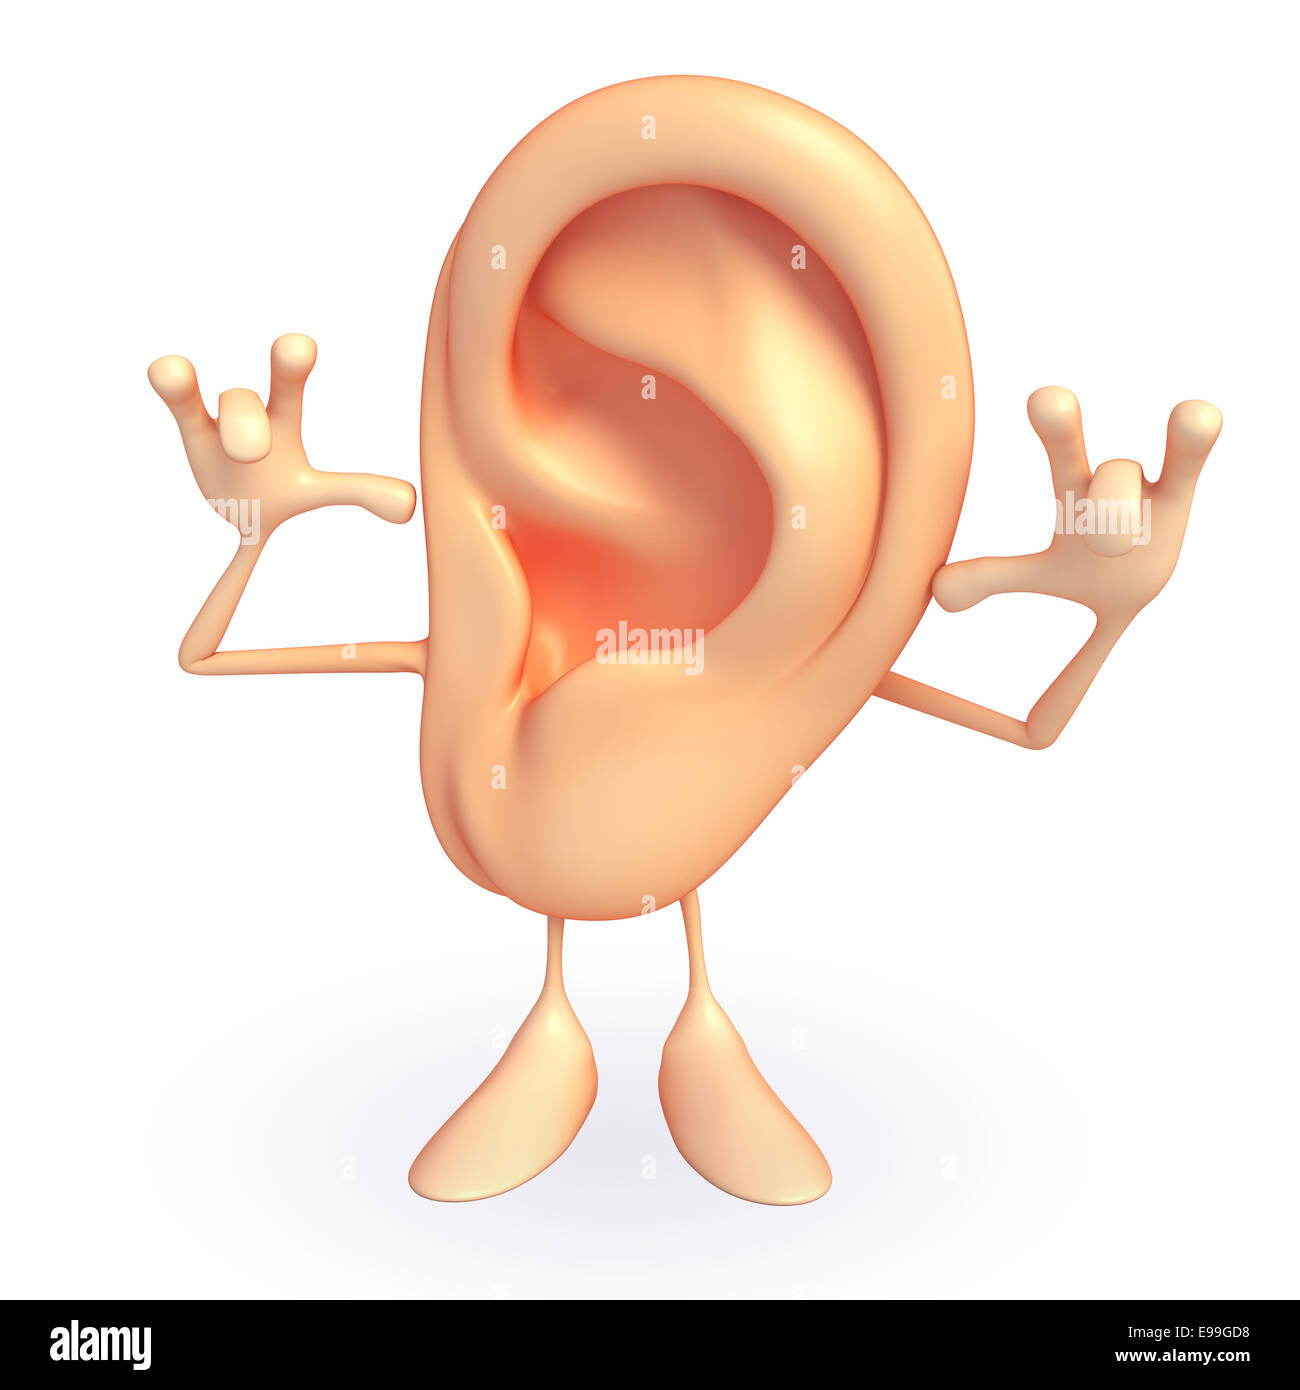 Cartoon Character of ear with teasing pose Stock Photo